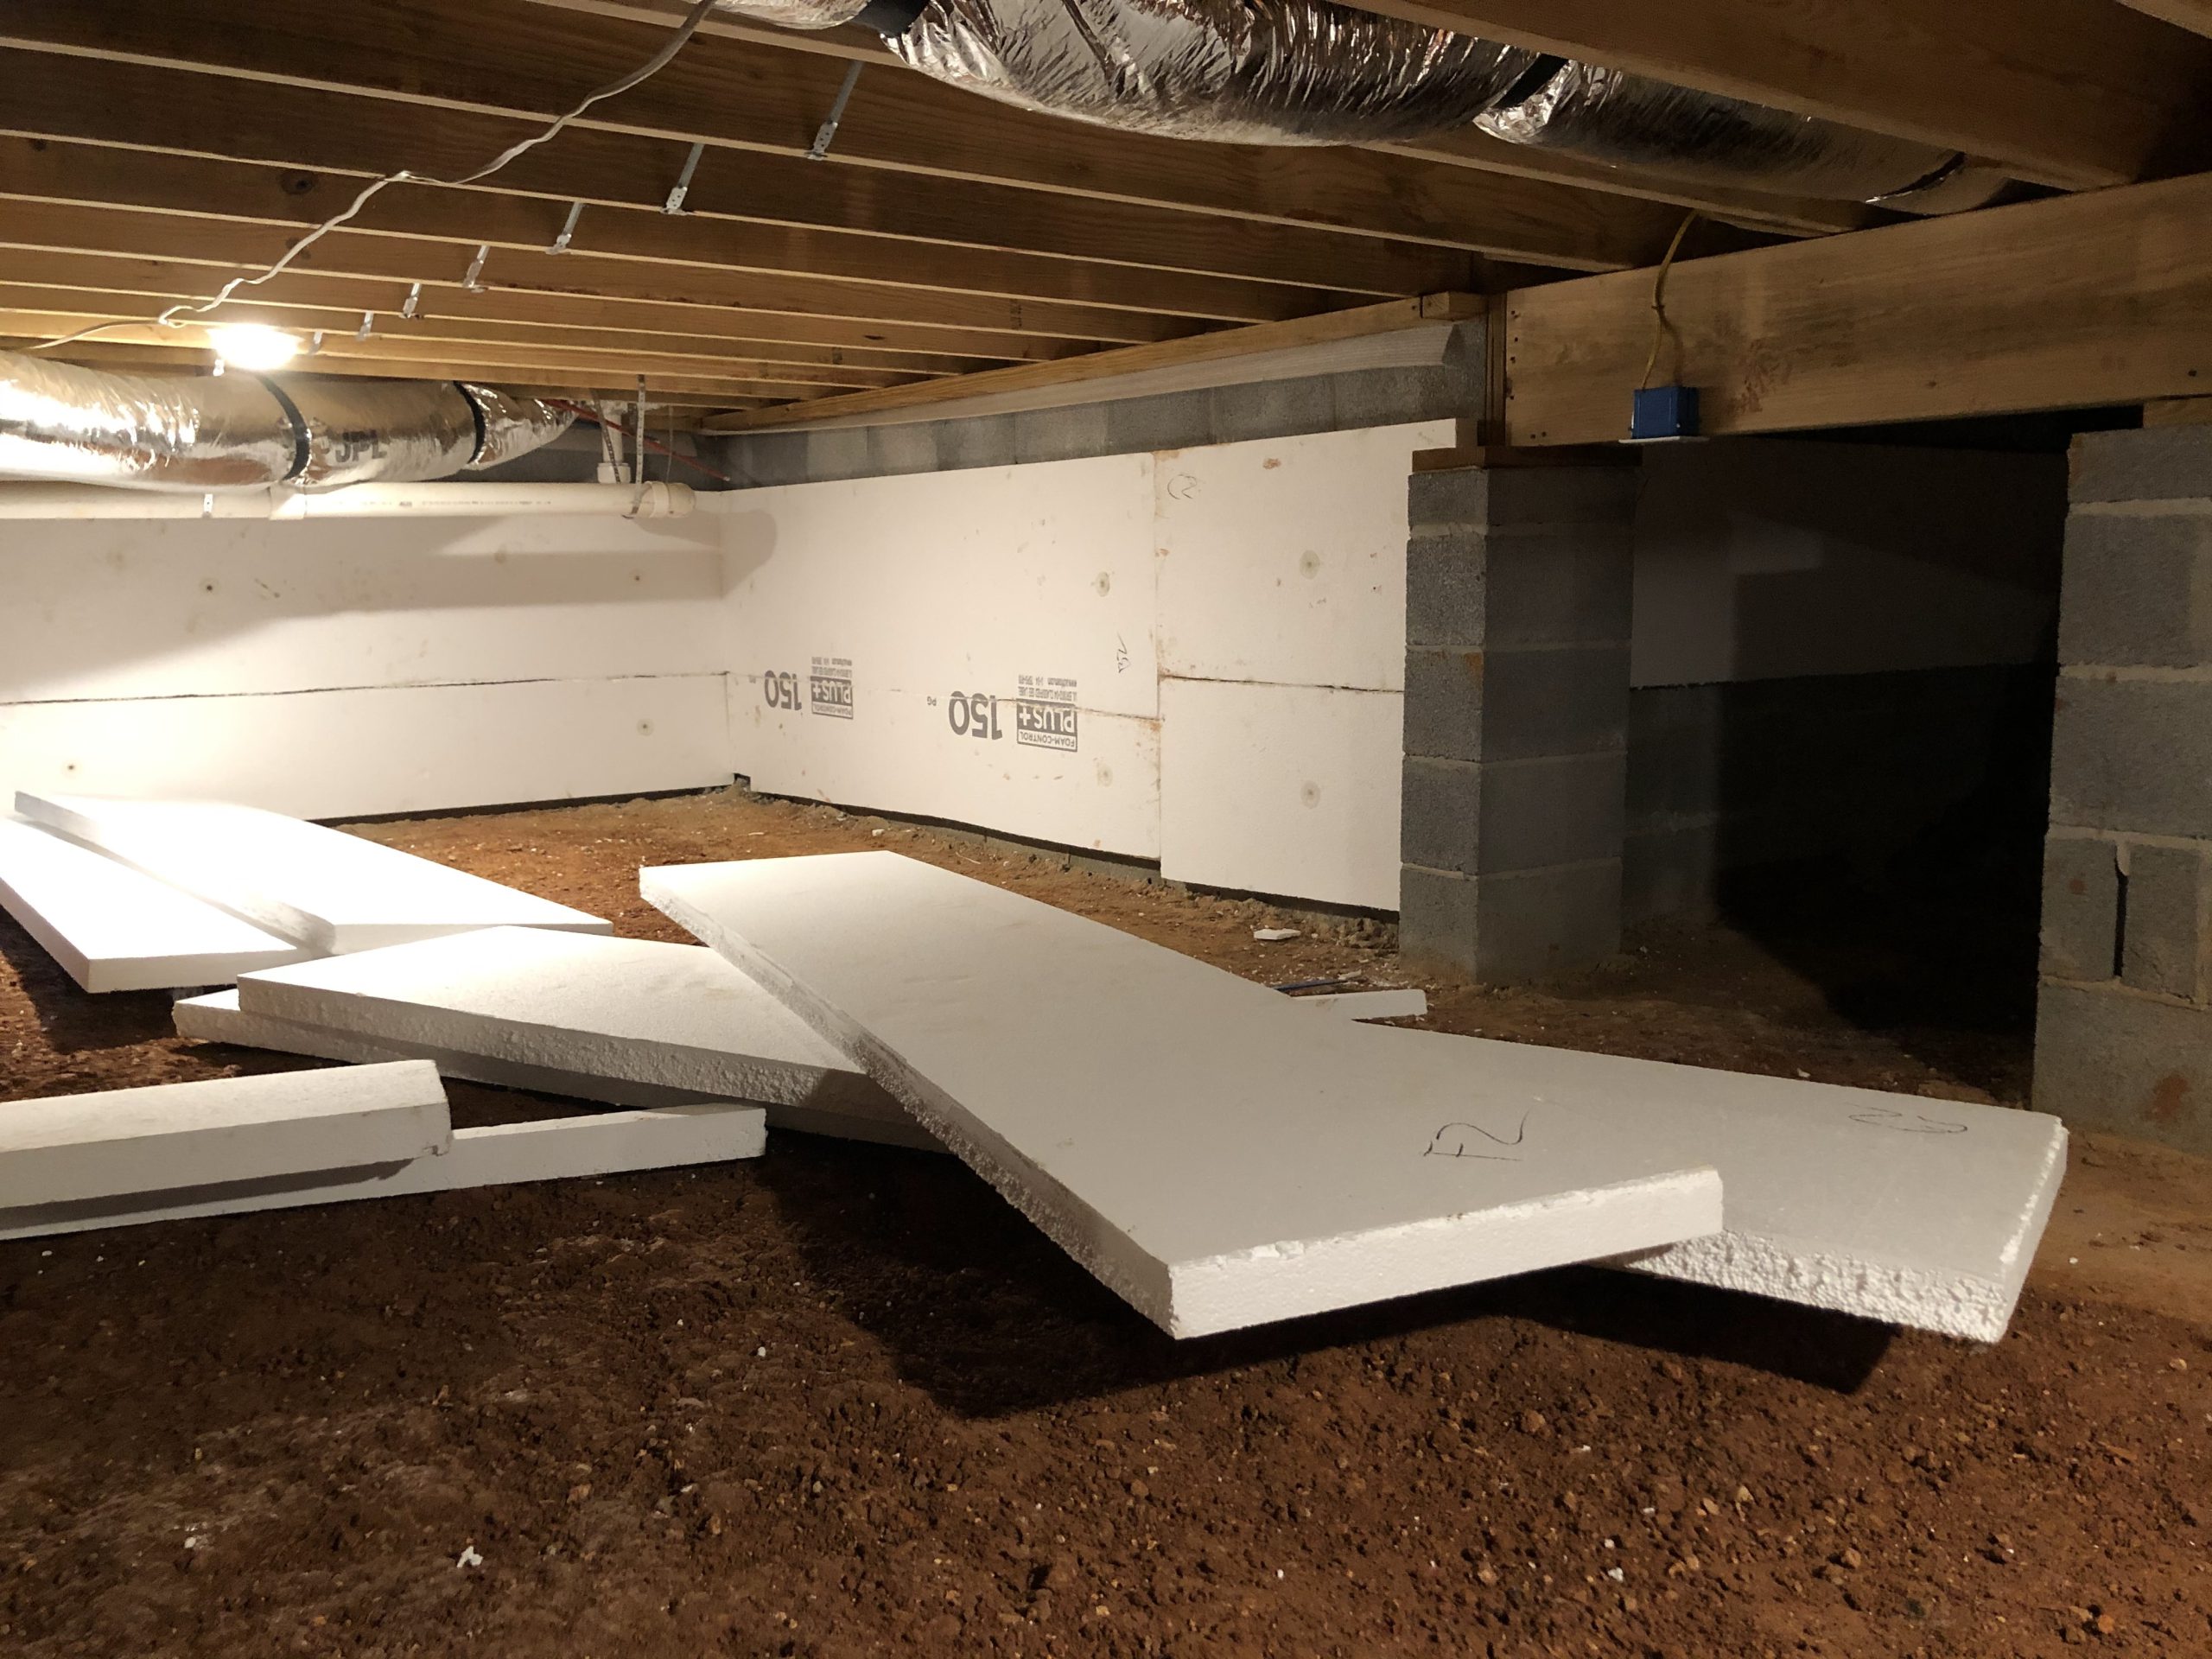 Value providing standard insulation for all crawl space conditions